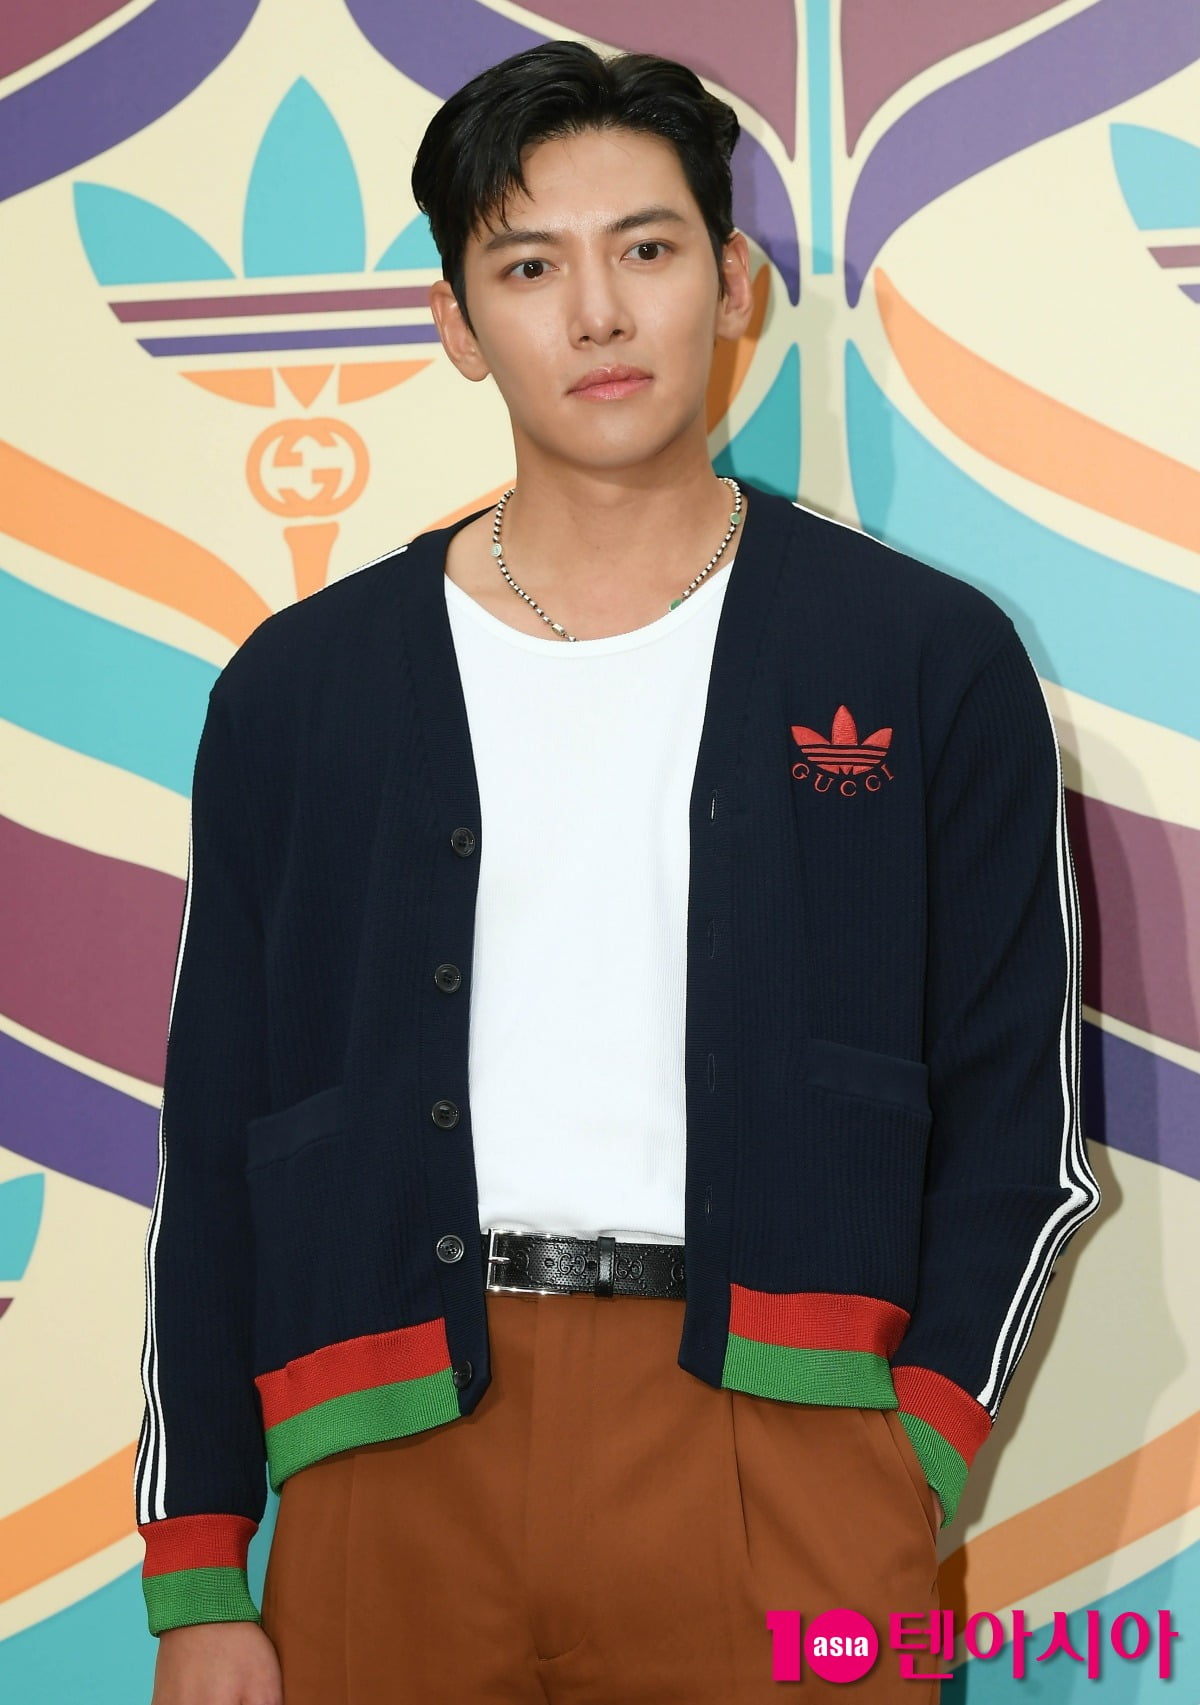 Ji Chang-wook apologizes for indoor smoking controversy